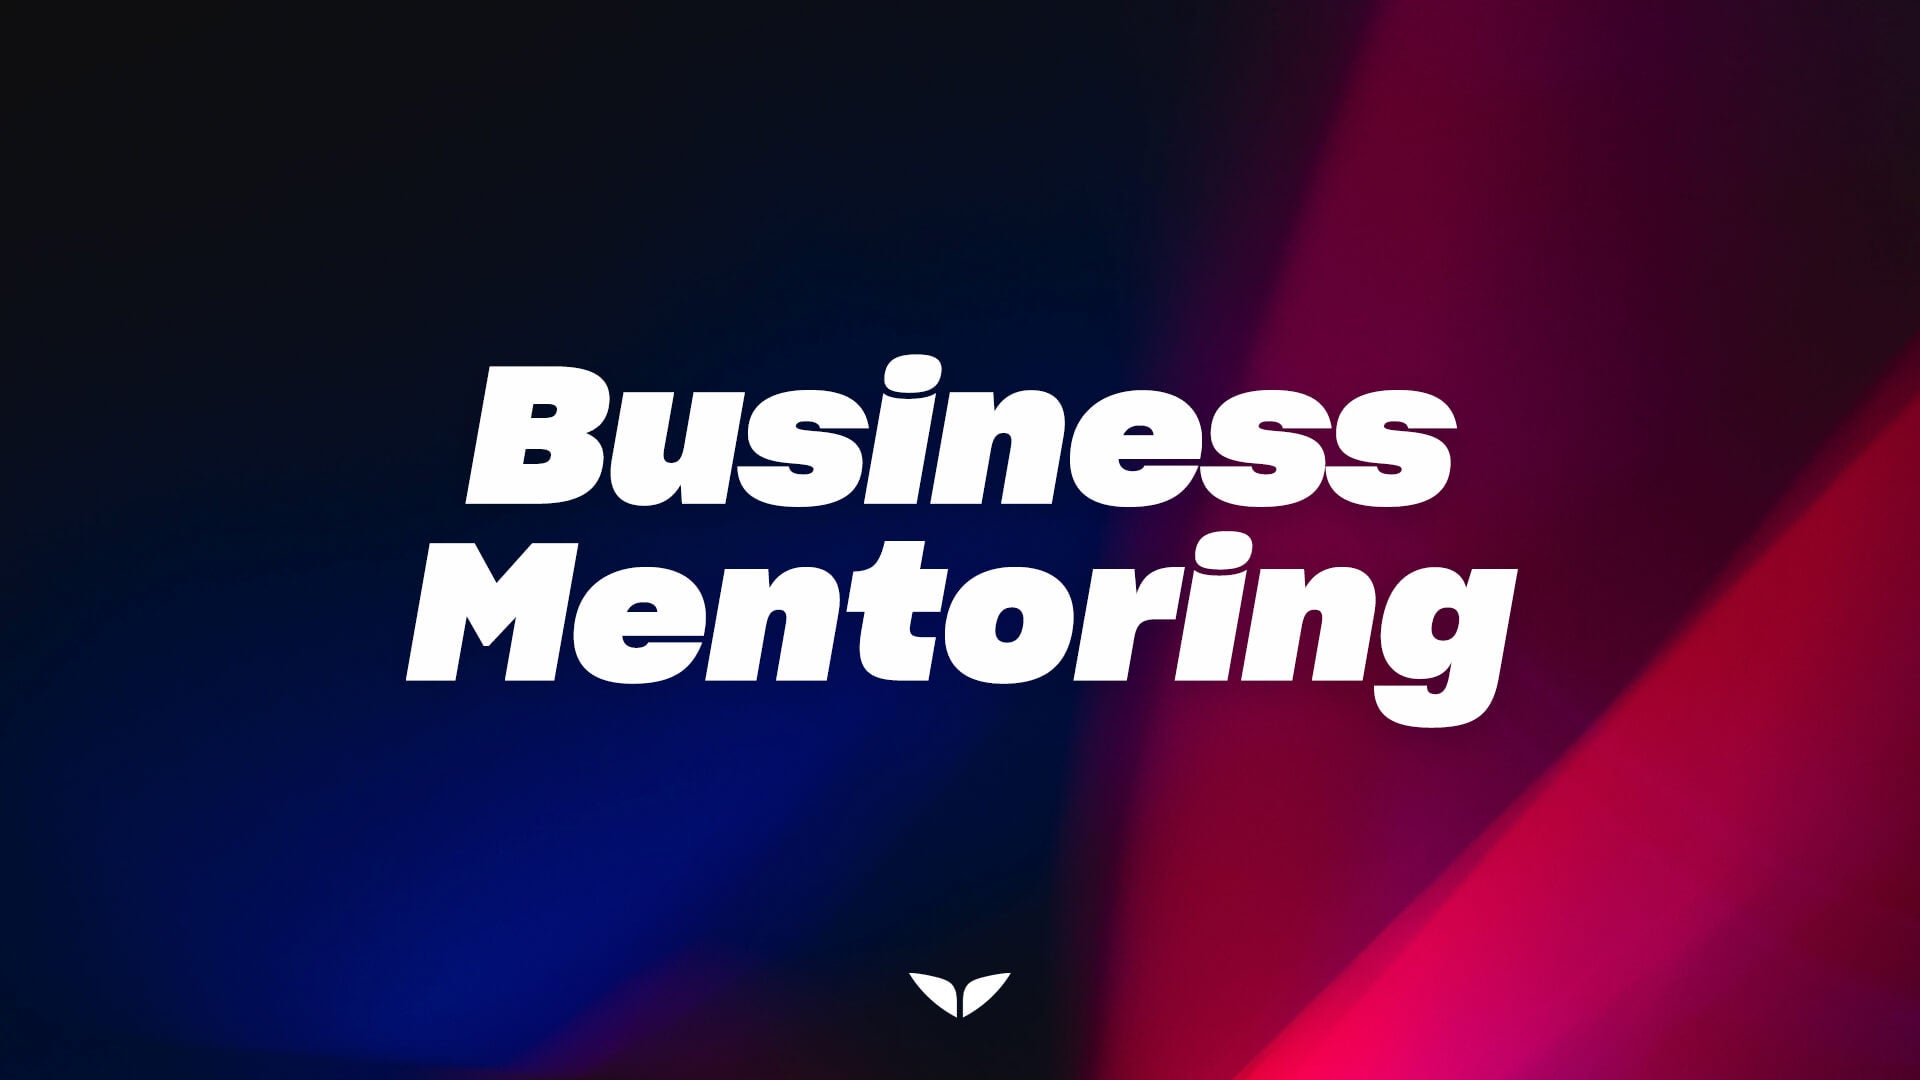 Business Mentoring By Mindvalley - Free Download Course By CEO Vishen Lakhiani